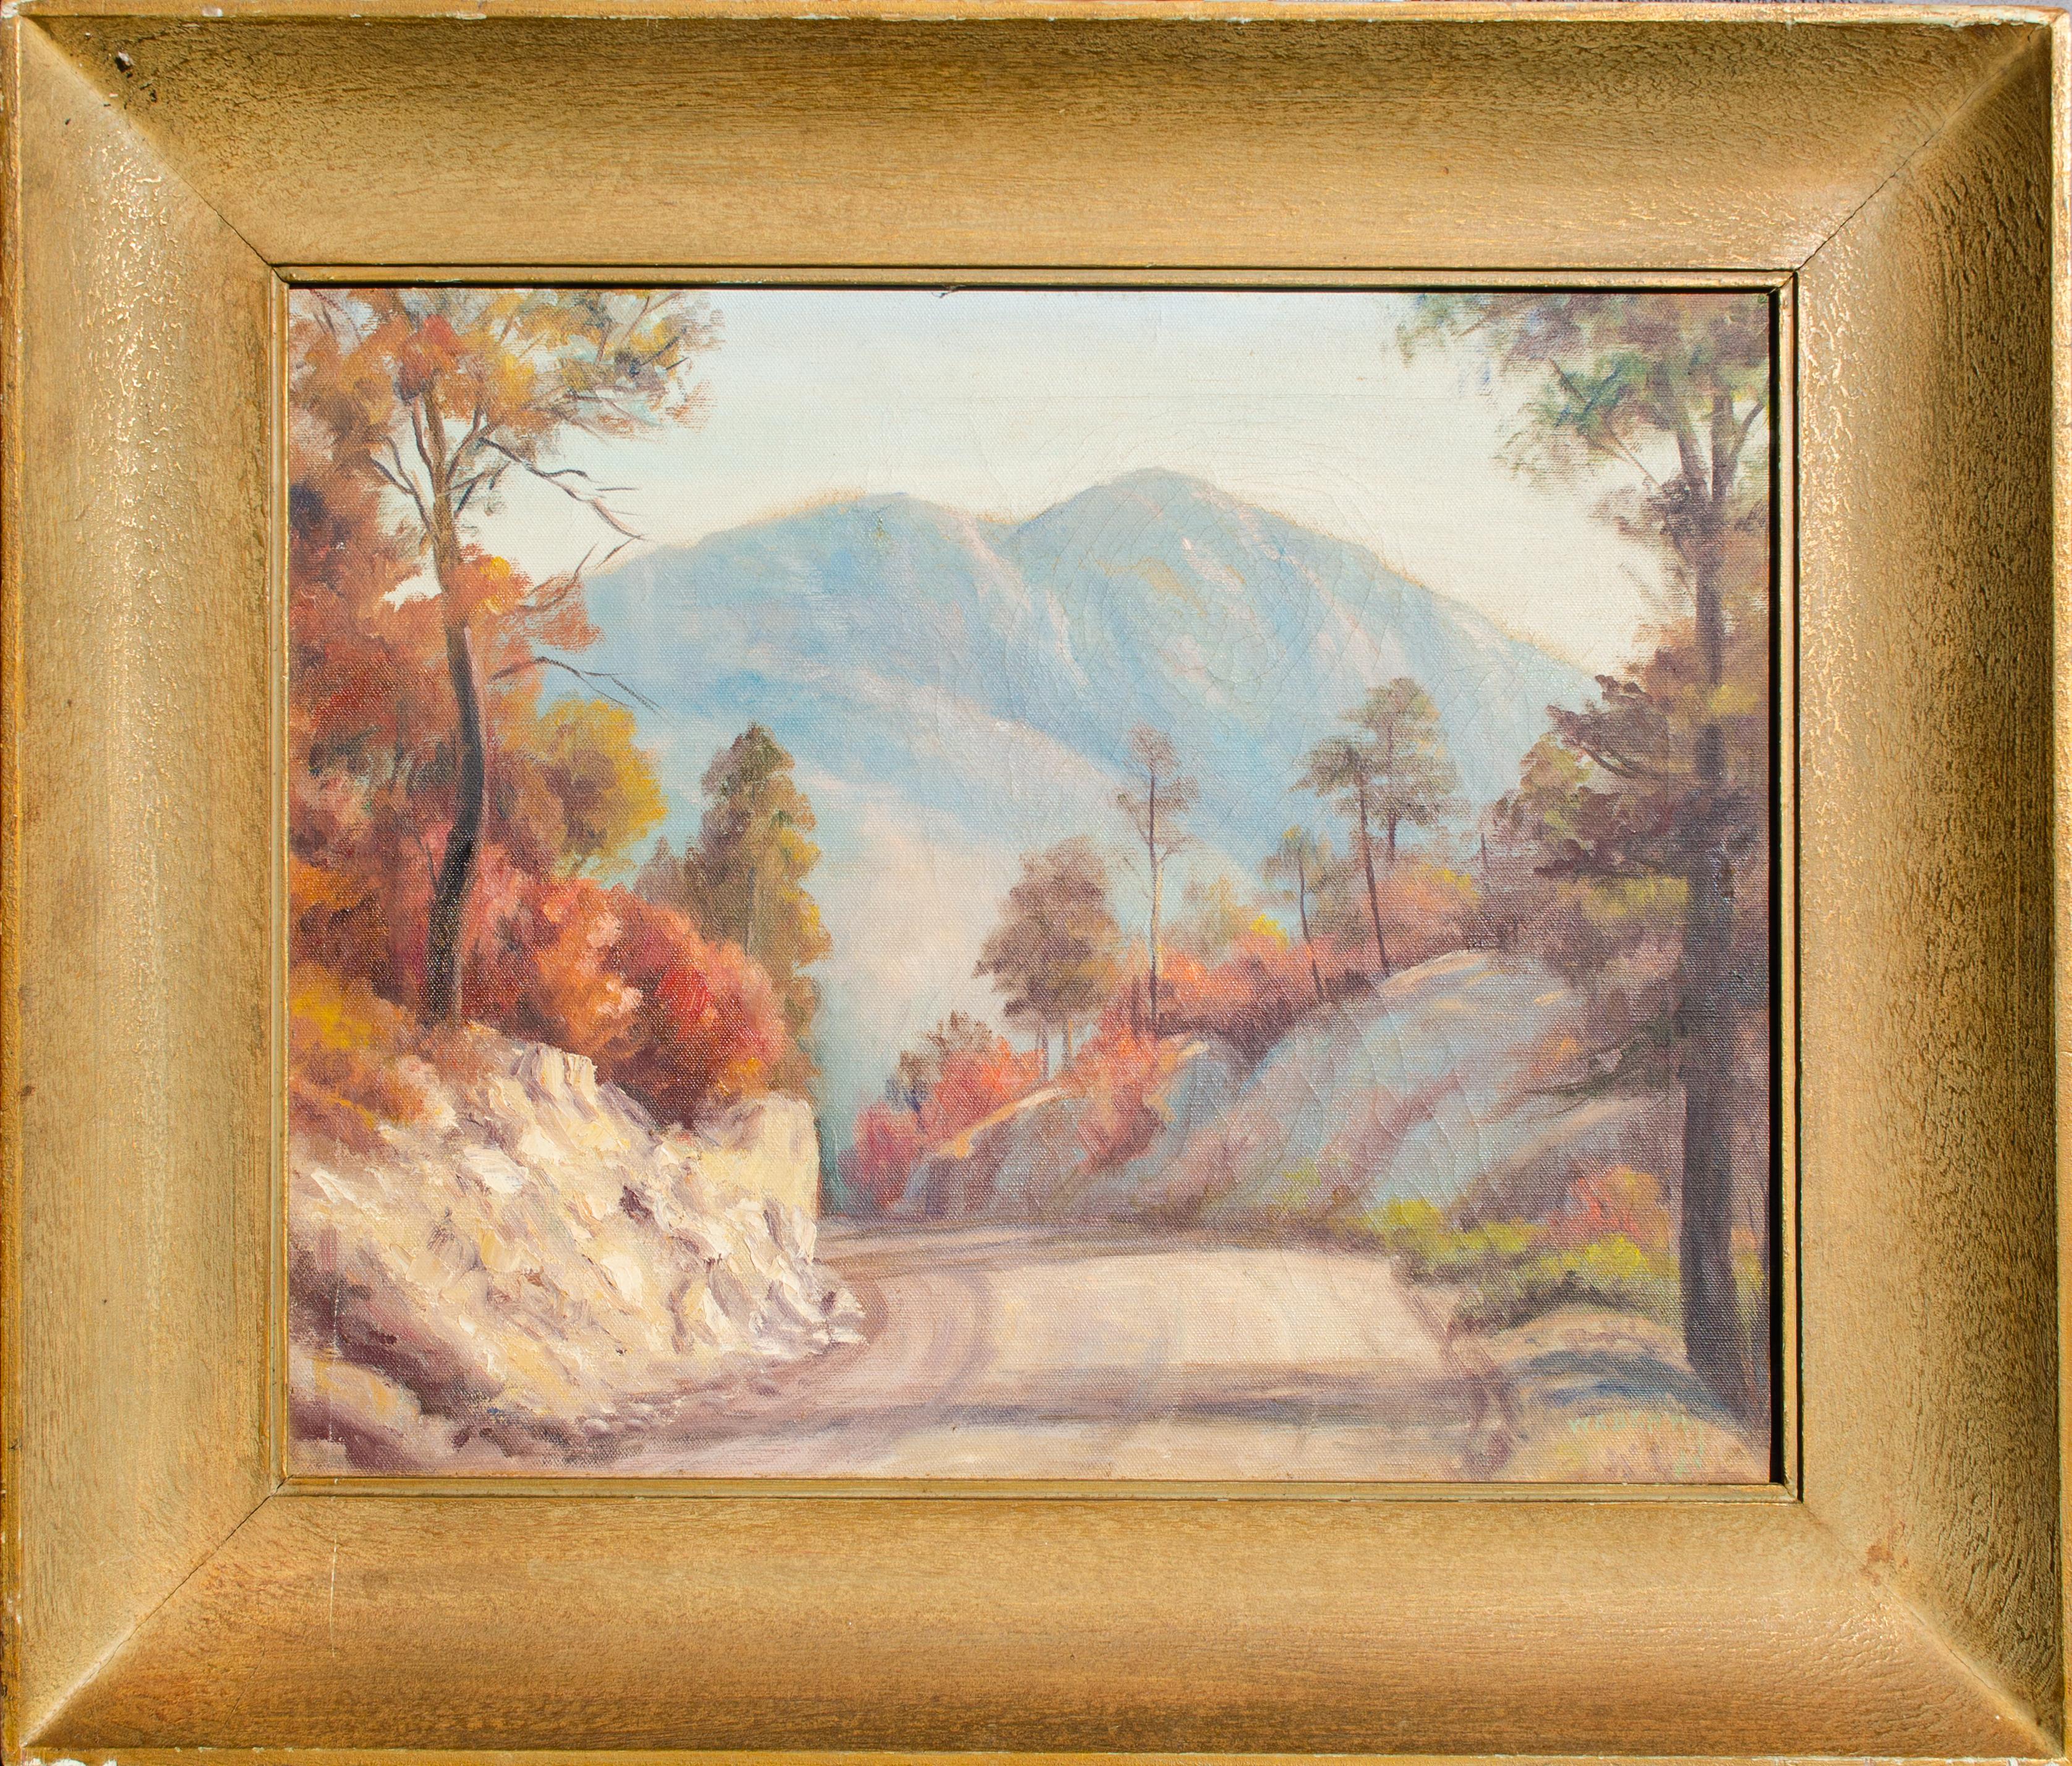 W.E. Beatty
Untitled (Autumn Landscape), c. 20th century
Oil on canvas
16 x 20 in.
Framed: 22 1/2 x 26 1/2 in.
Signed lower right: W E BEATTY